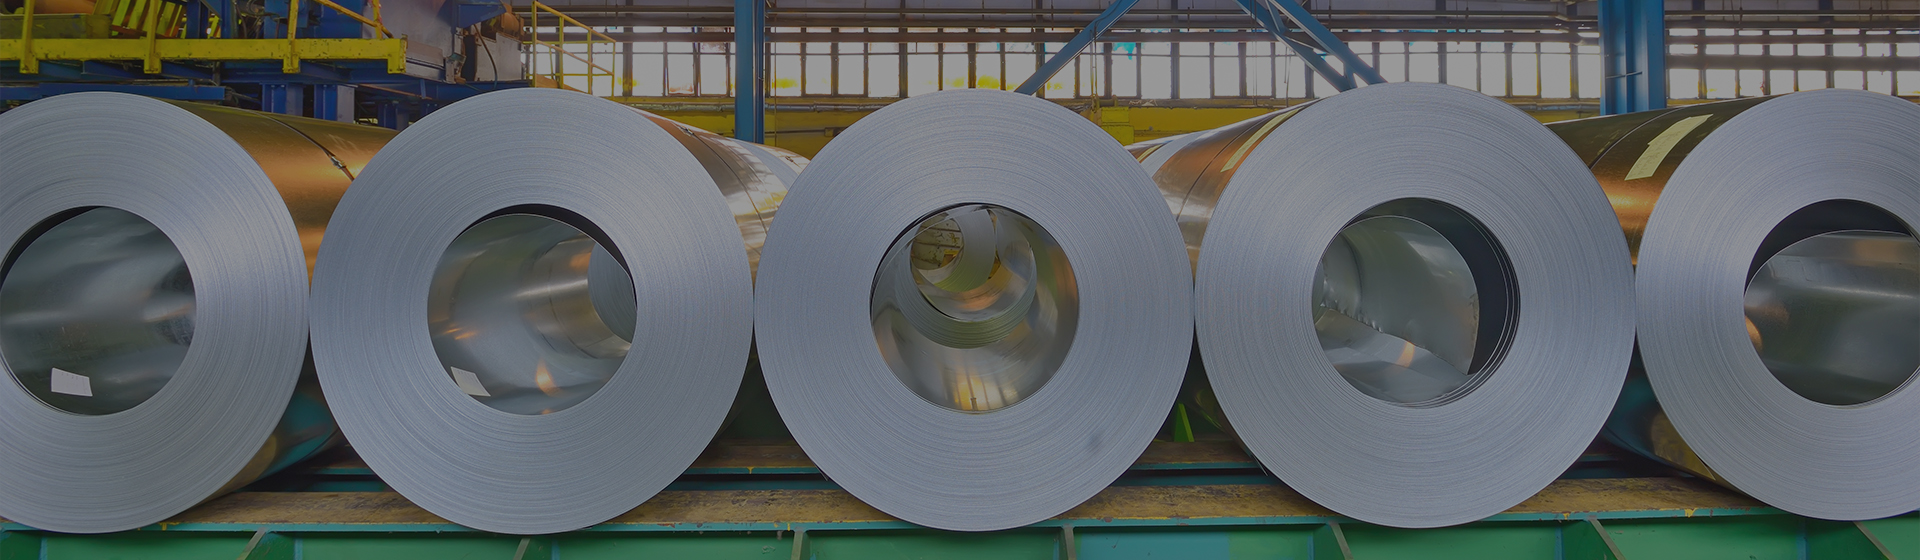 Cold rolling, galvanizing and annealing project in Algeria Algeria 400,000 tons Cold rolled sheet 0.18～1.5×850～1250㎜ 2 sets of reversing 6-high rolling mill, 1 set of pickling train, 1 set of hot galvanizing line, 2 sets of color coating line, 20 sets of bell-type furnace, 1 set of electrolyse degreasing line, 1 set of temper mill as well as 1 set of withdraw and straightening machine